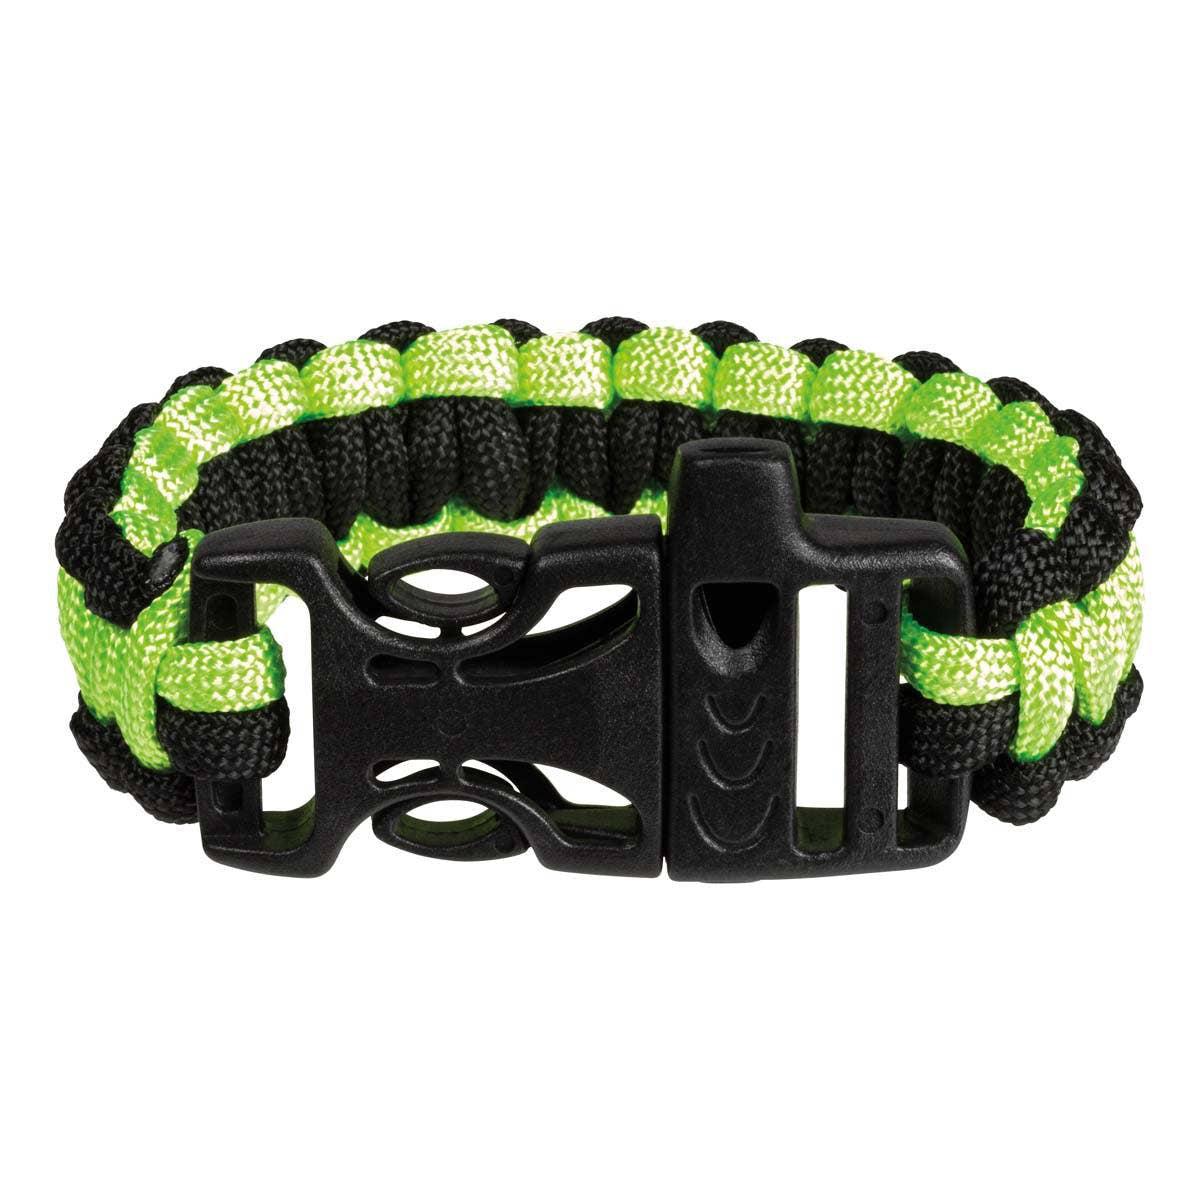 Outdoor Discovery Survival Bracelet With Whistle-Gear &amp; Apparel-Yellow Springs Toy Company